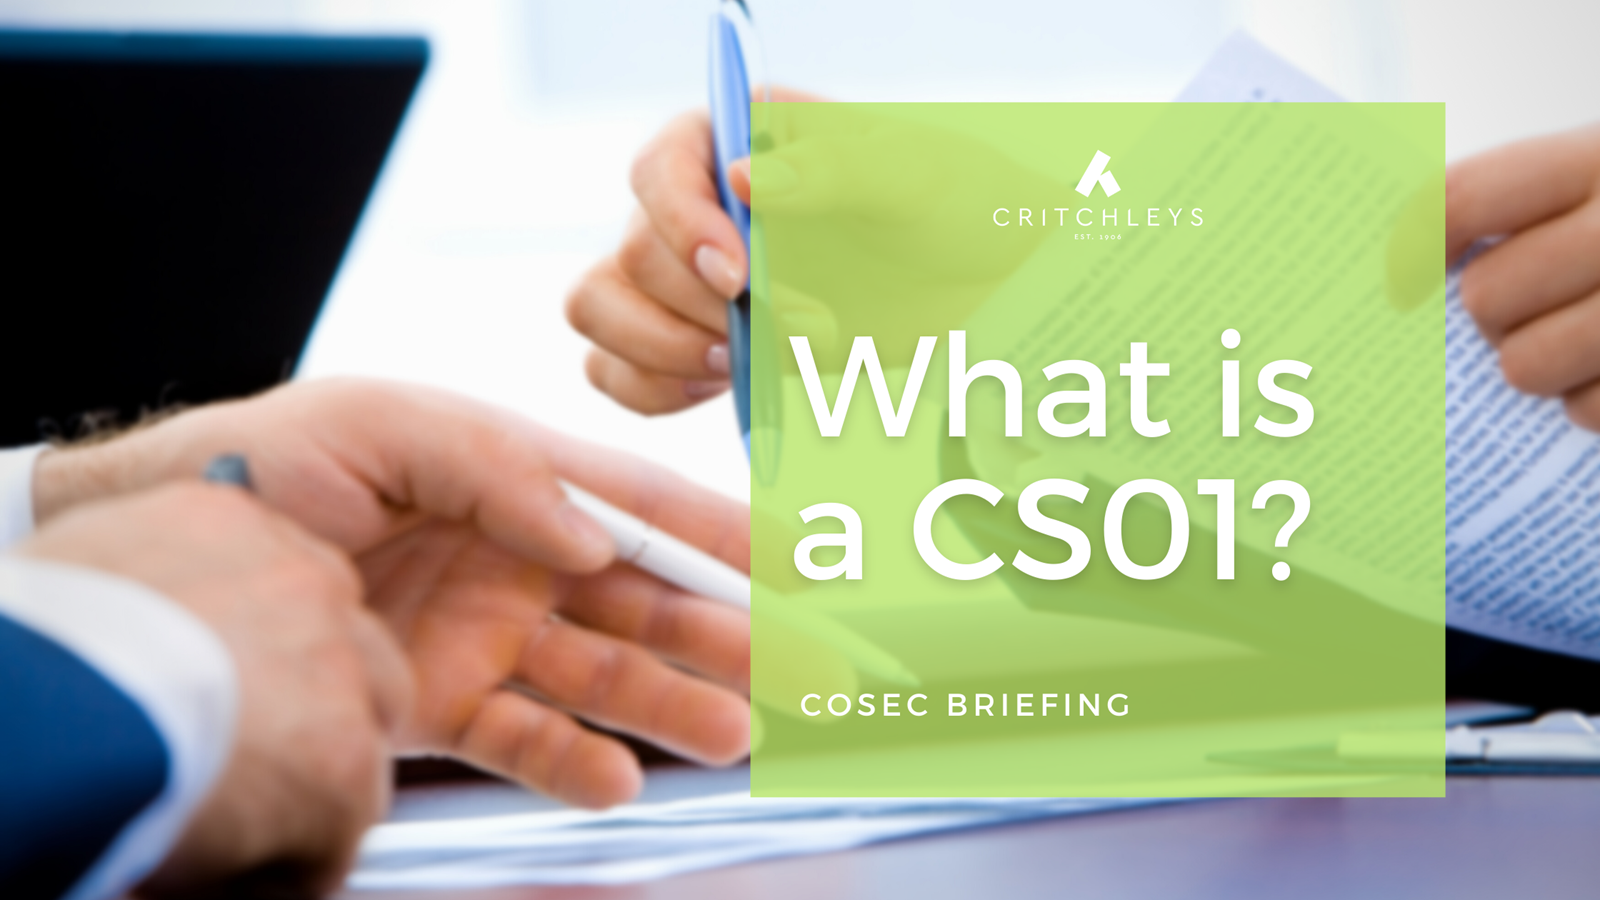 What is a CS01?